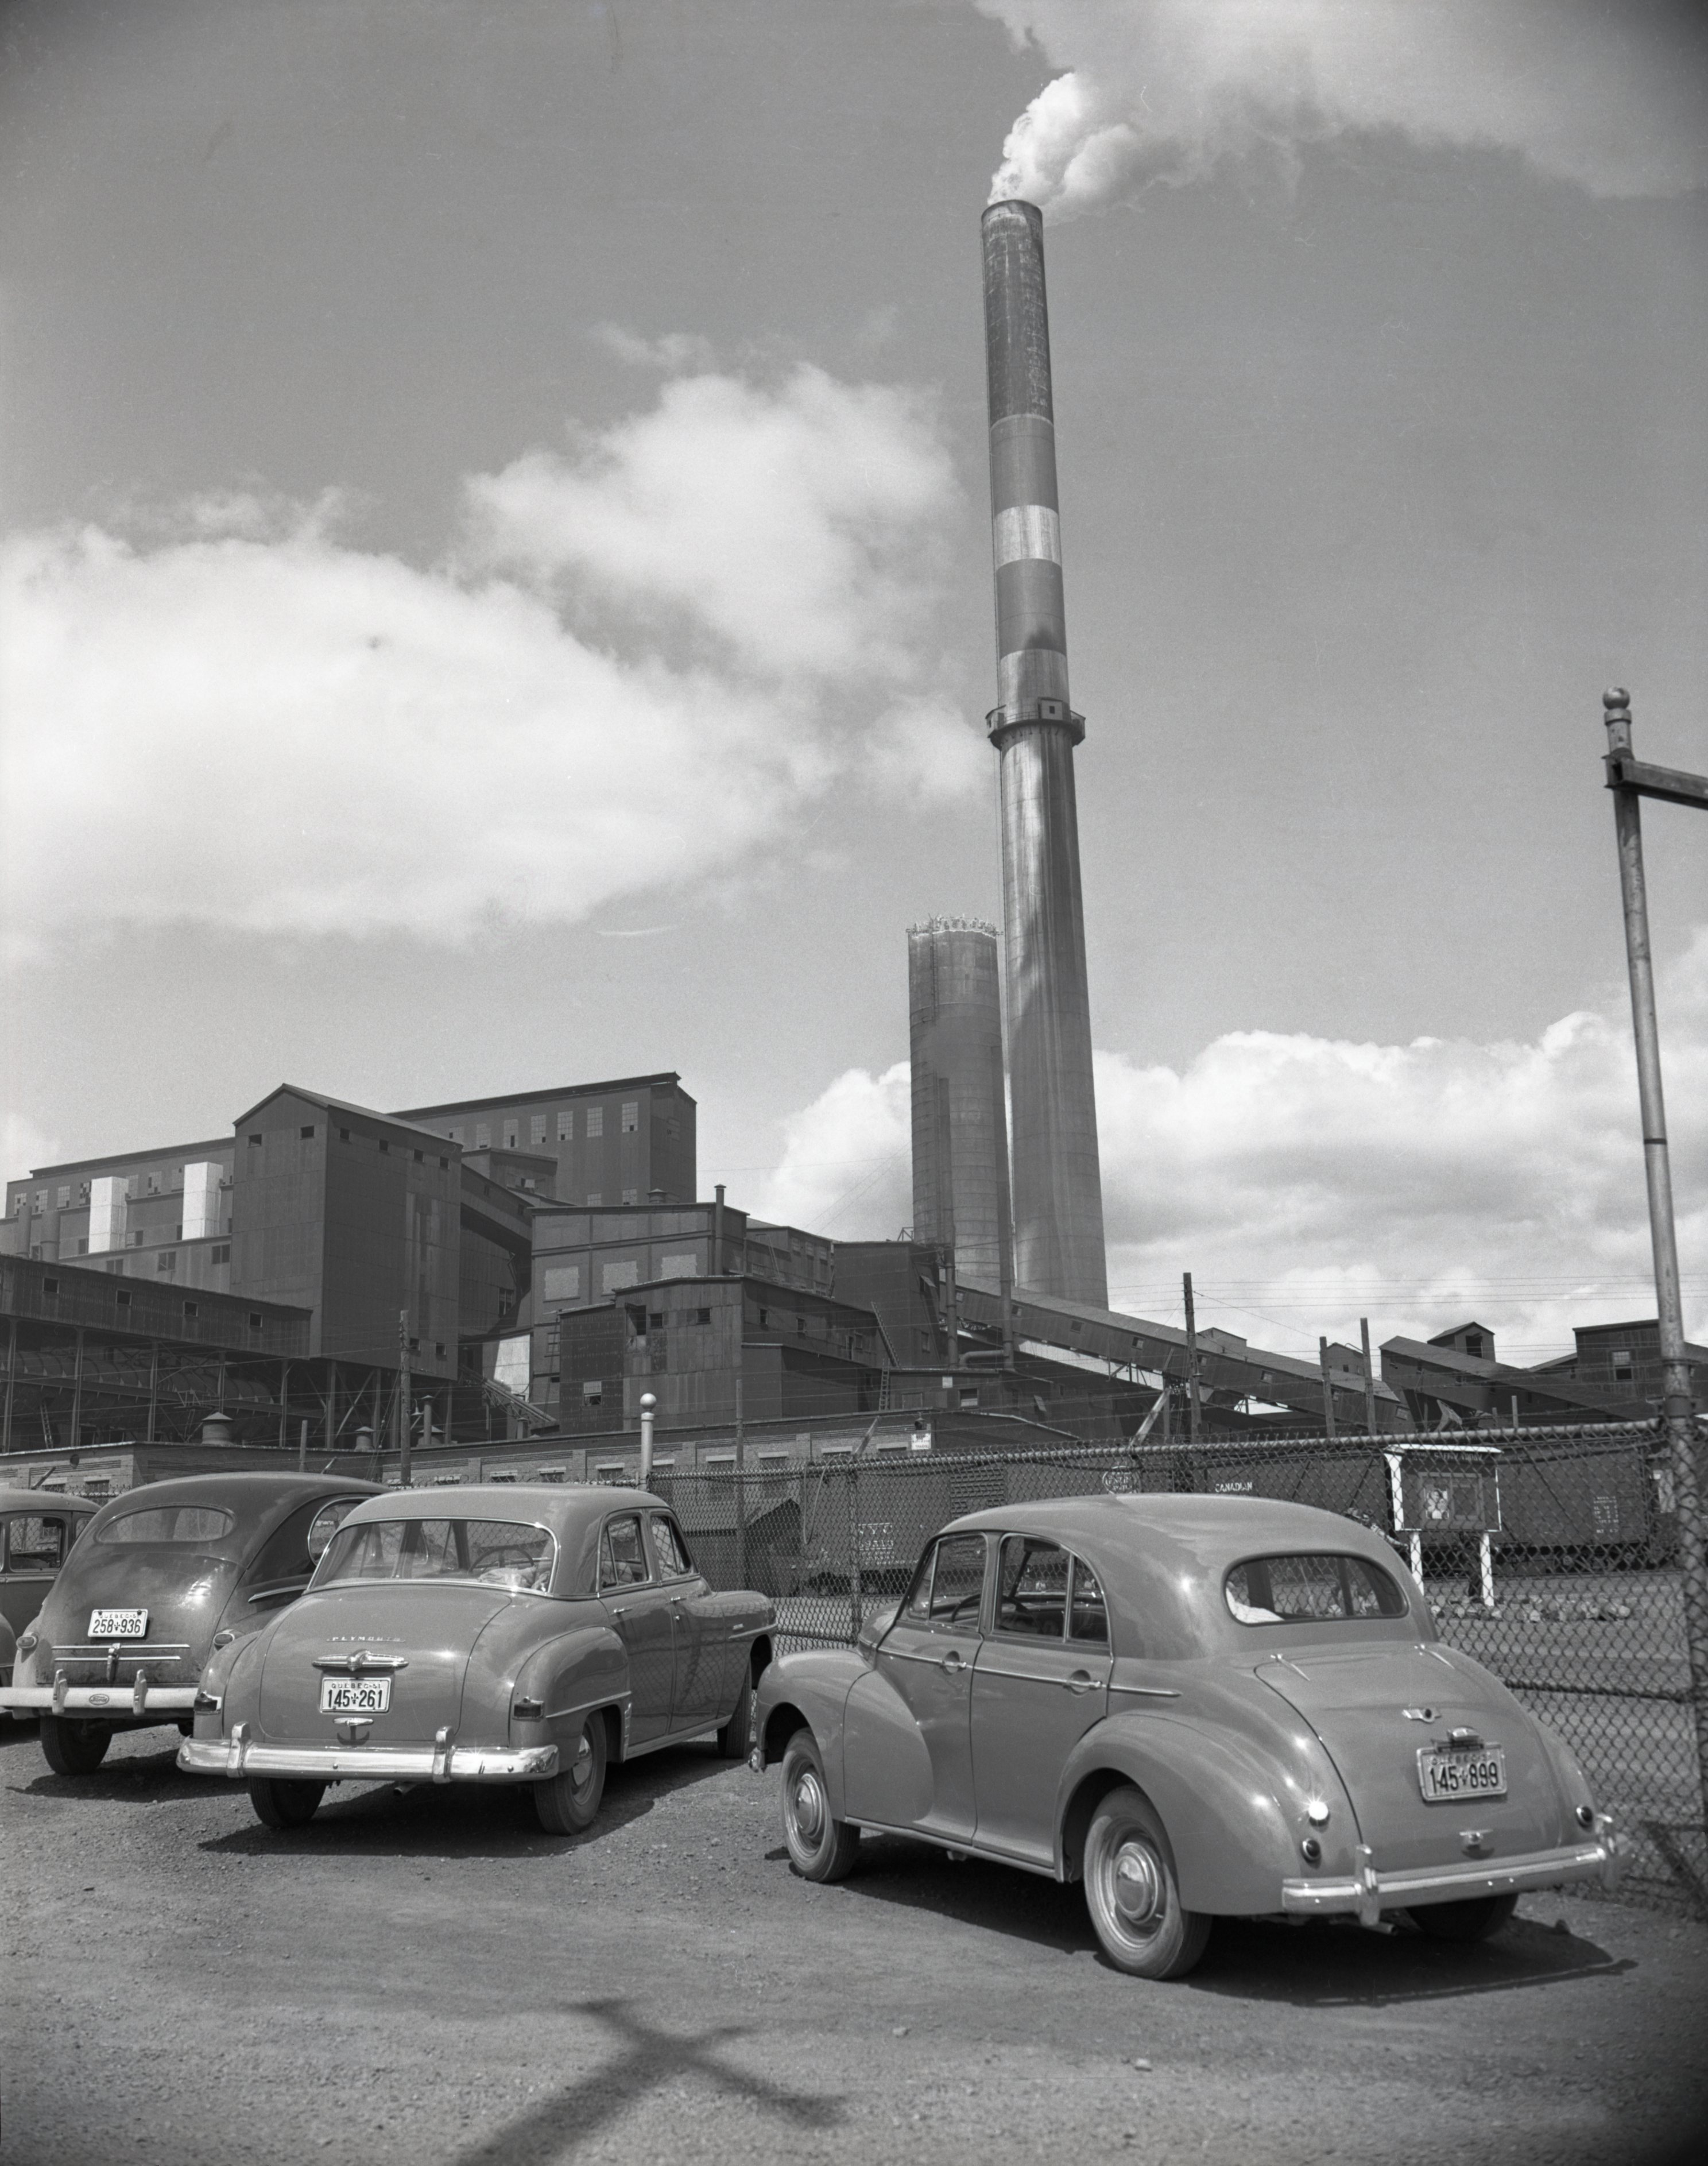 Black-and-white photograph of three old cars parked in front of the Horne mine’s fence. You can see the smelter with smoke rising from a chimney in the background.